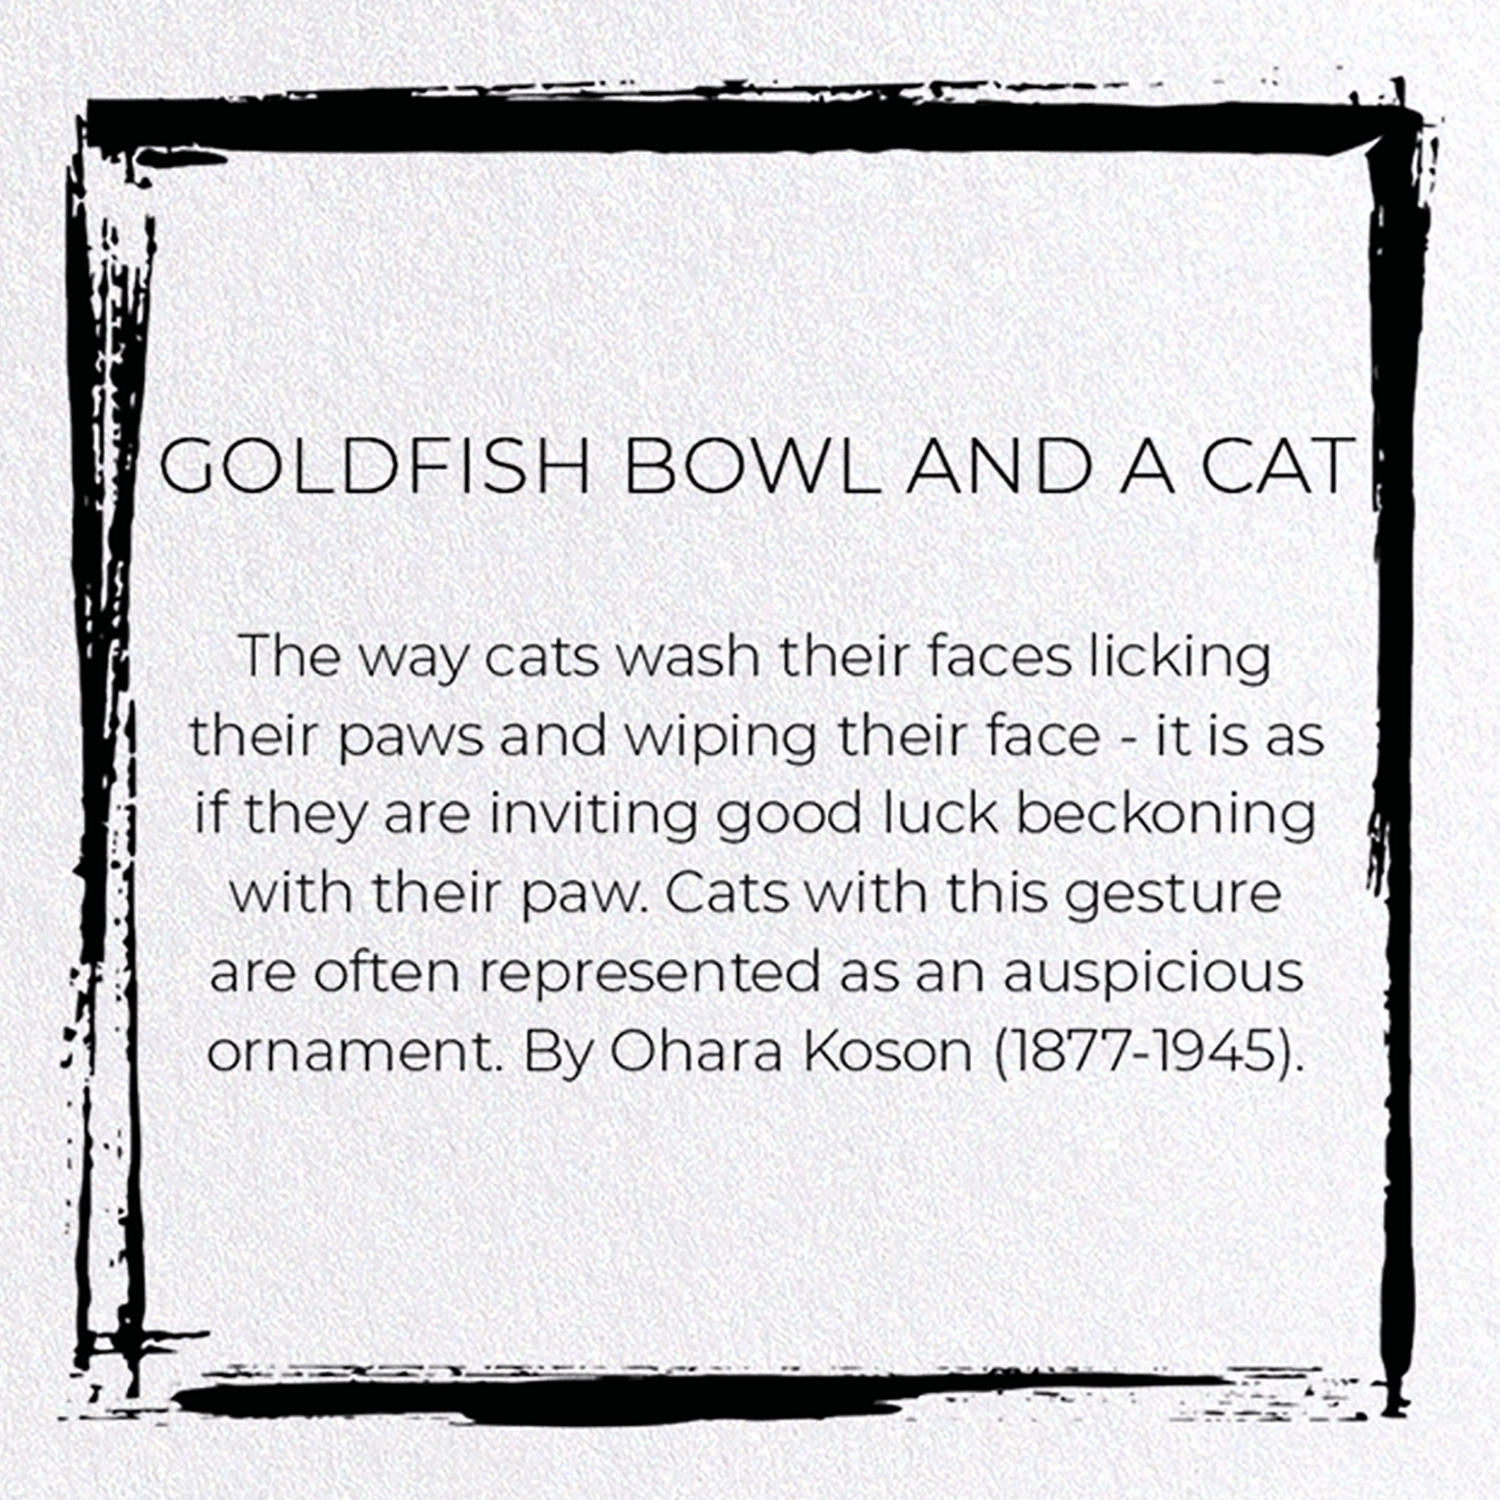 GOLDFISH BOWL AND A CAT